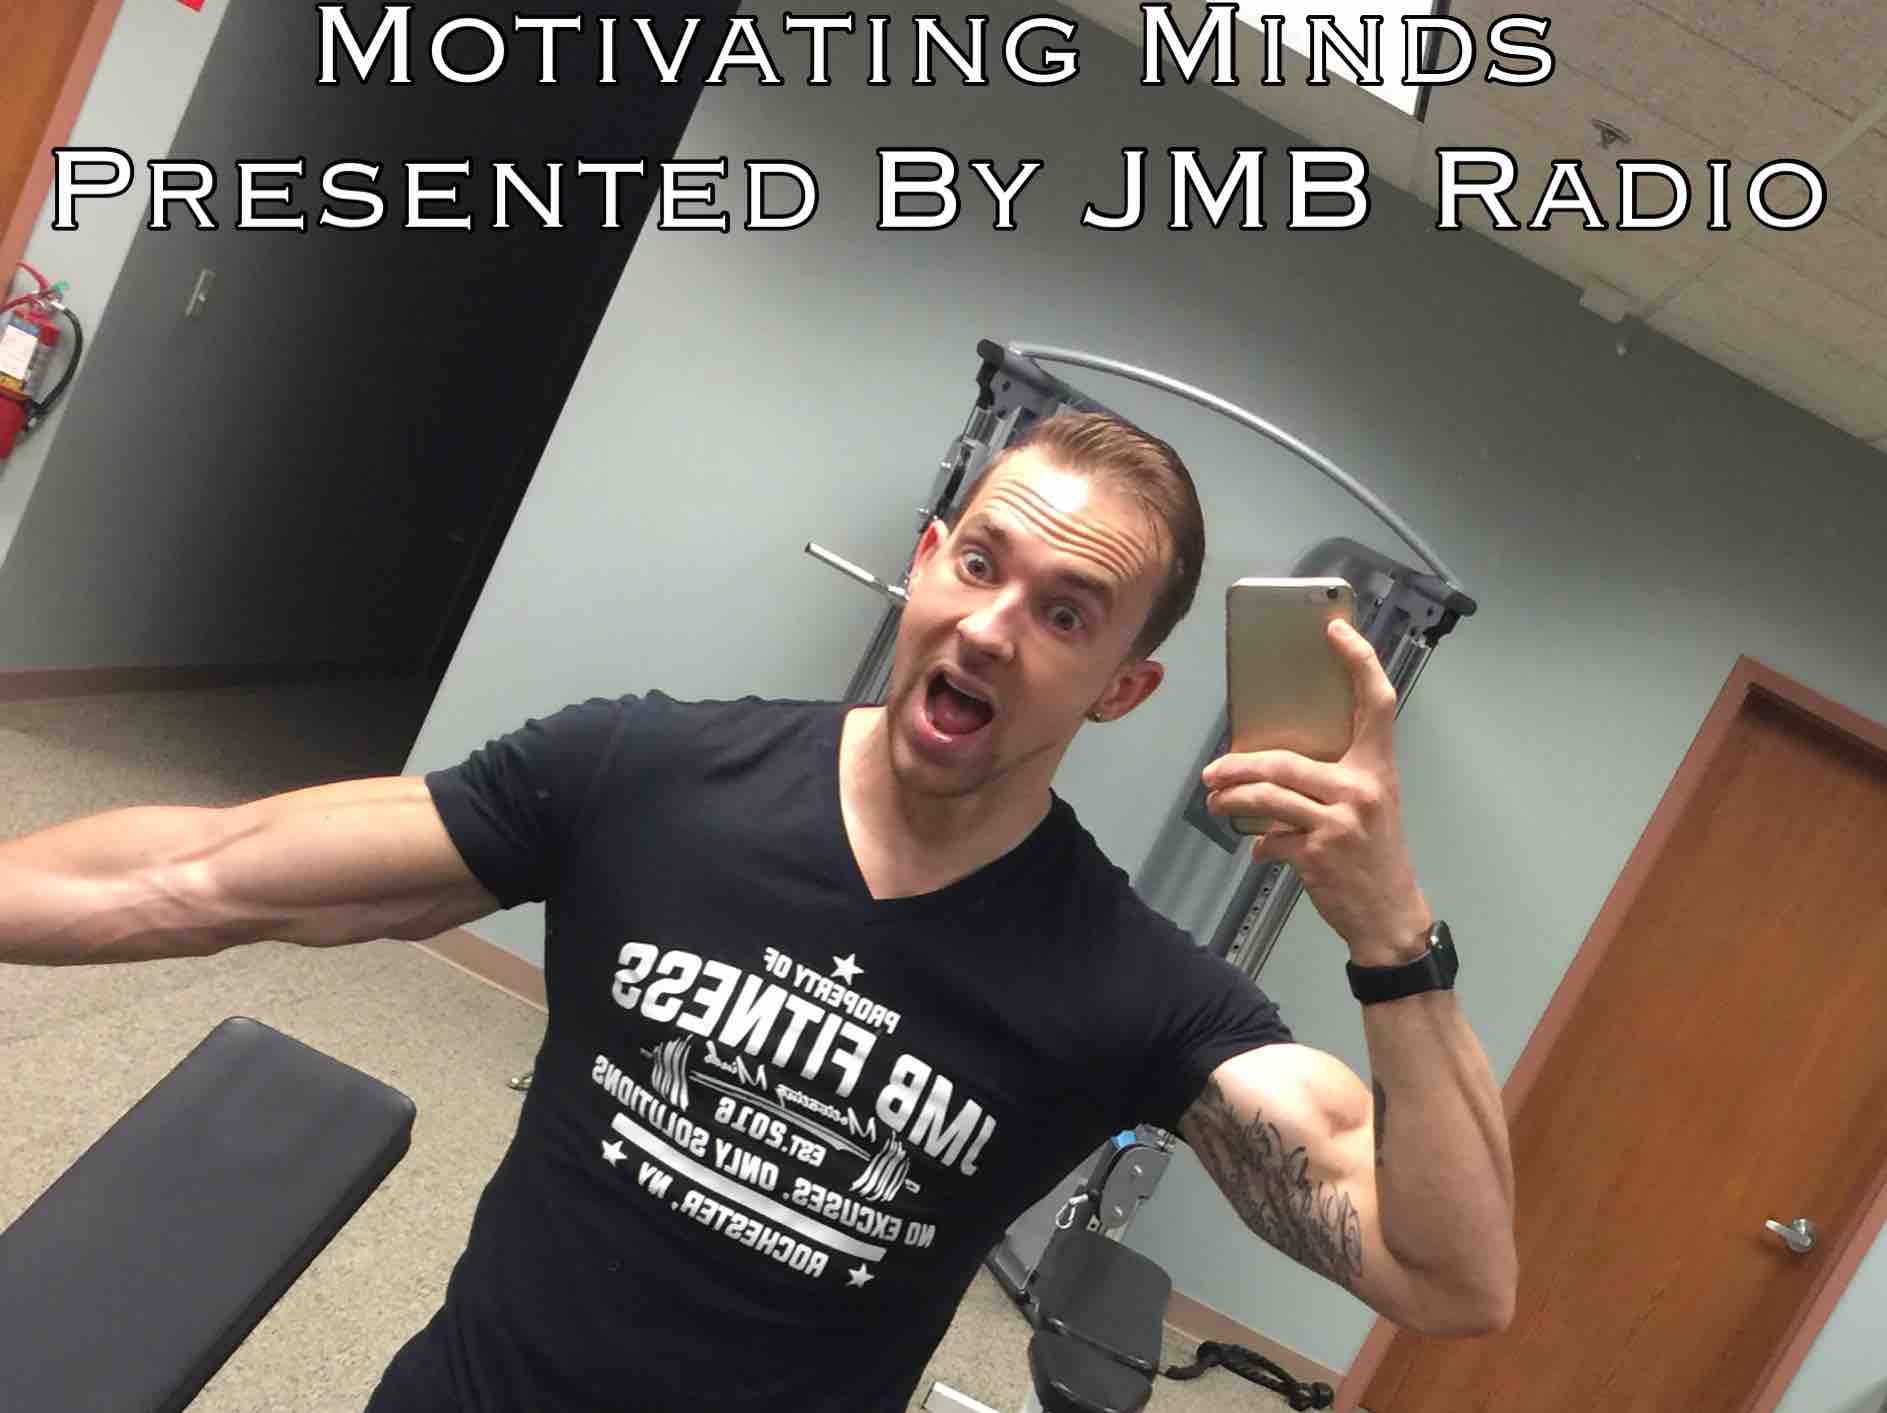 Motivating Minds: Episode 58: "Death To Yesterday"